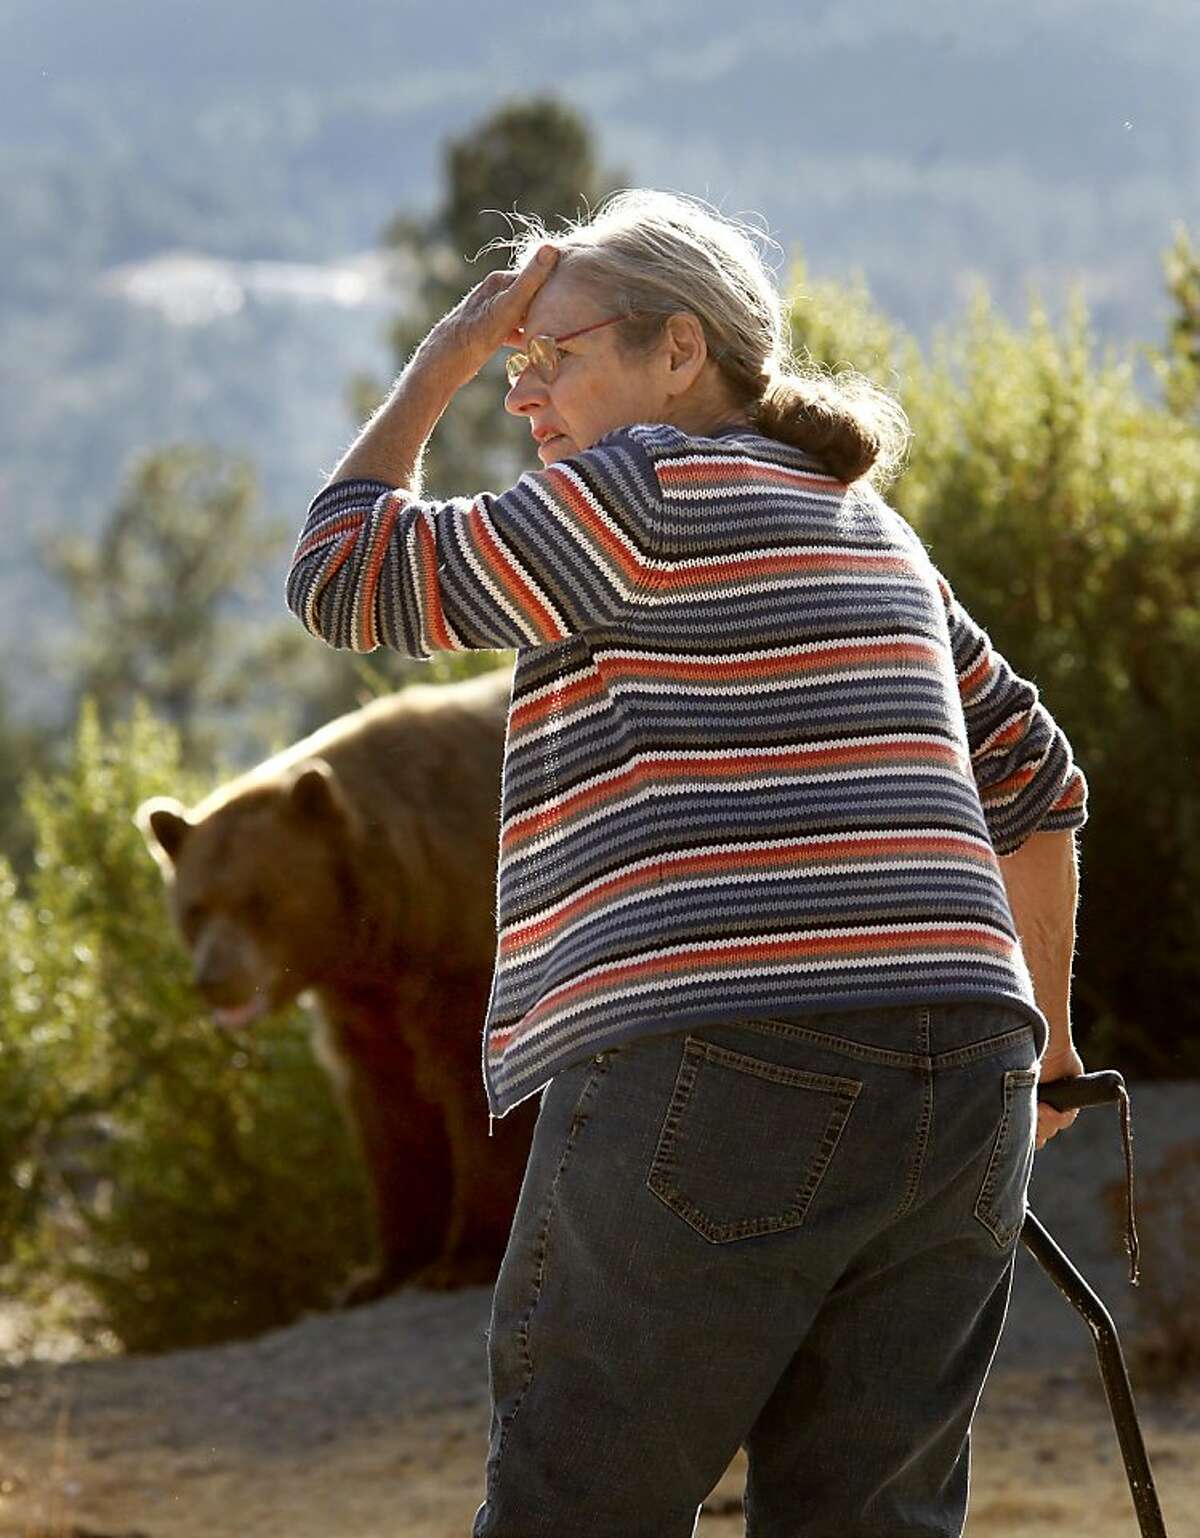 Lynne Gravier is worried about the physical health of the bear she finds on her property. Lynne Gravier, a Mendocino County woman who has been feeding bears for many years, had her home raided by state Fish and Game officials and has had to vacate her place above Laytonville, Calif. Ran on: 09-27-2010 Lynn Gravier has been feeding bears on her Mendocino County property for many years. Ran on: 09-27-2010 Lynn Gravier has been feeding bears on her Mendocino County property for many years. Ran on: 09-27-2010 Lynn Gravier has been feeding bears on her Mendocino County property for many years. Ran on: 09-27-2010 Lynn Gravier has been feeding bears on her Mendocino County property for many years.